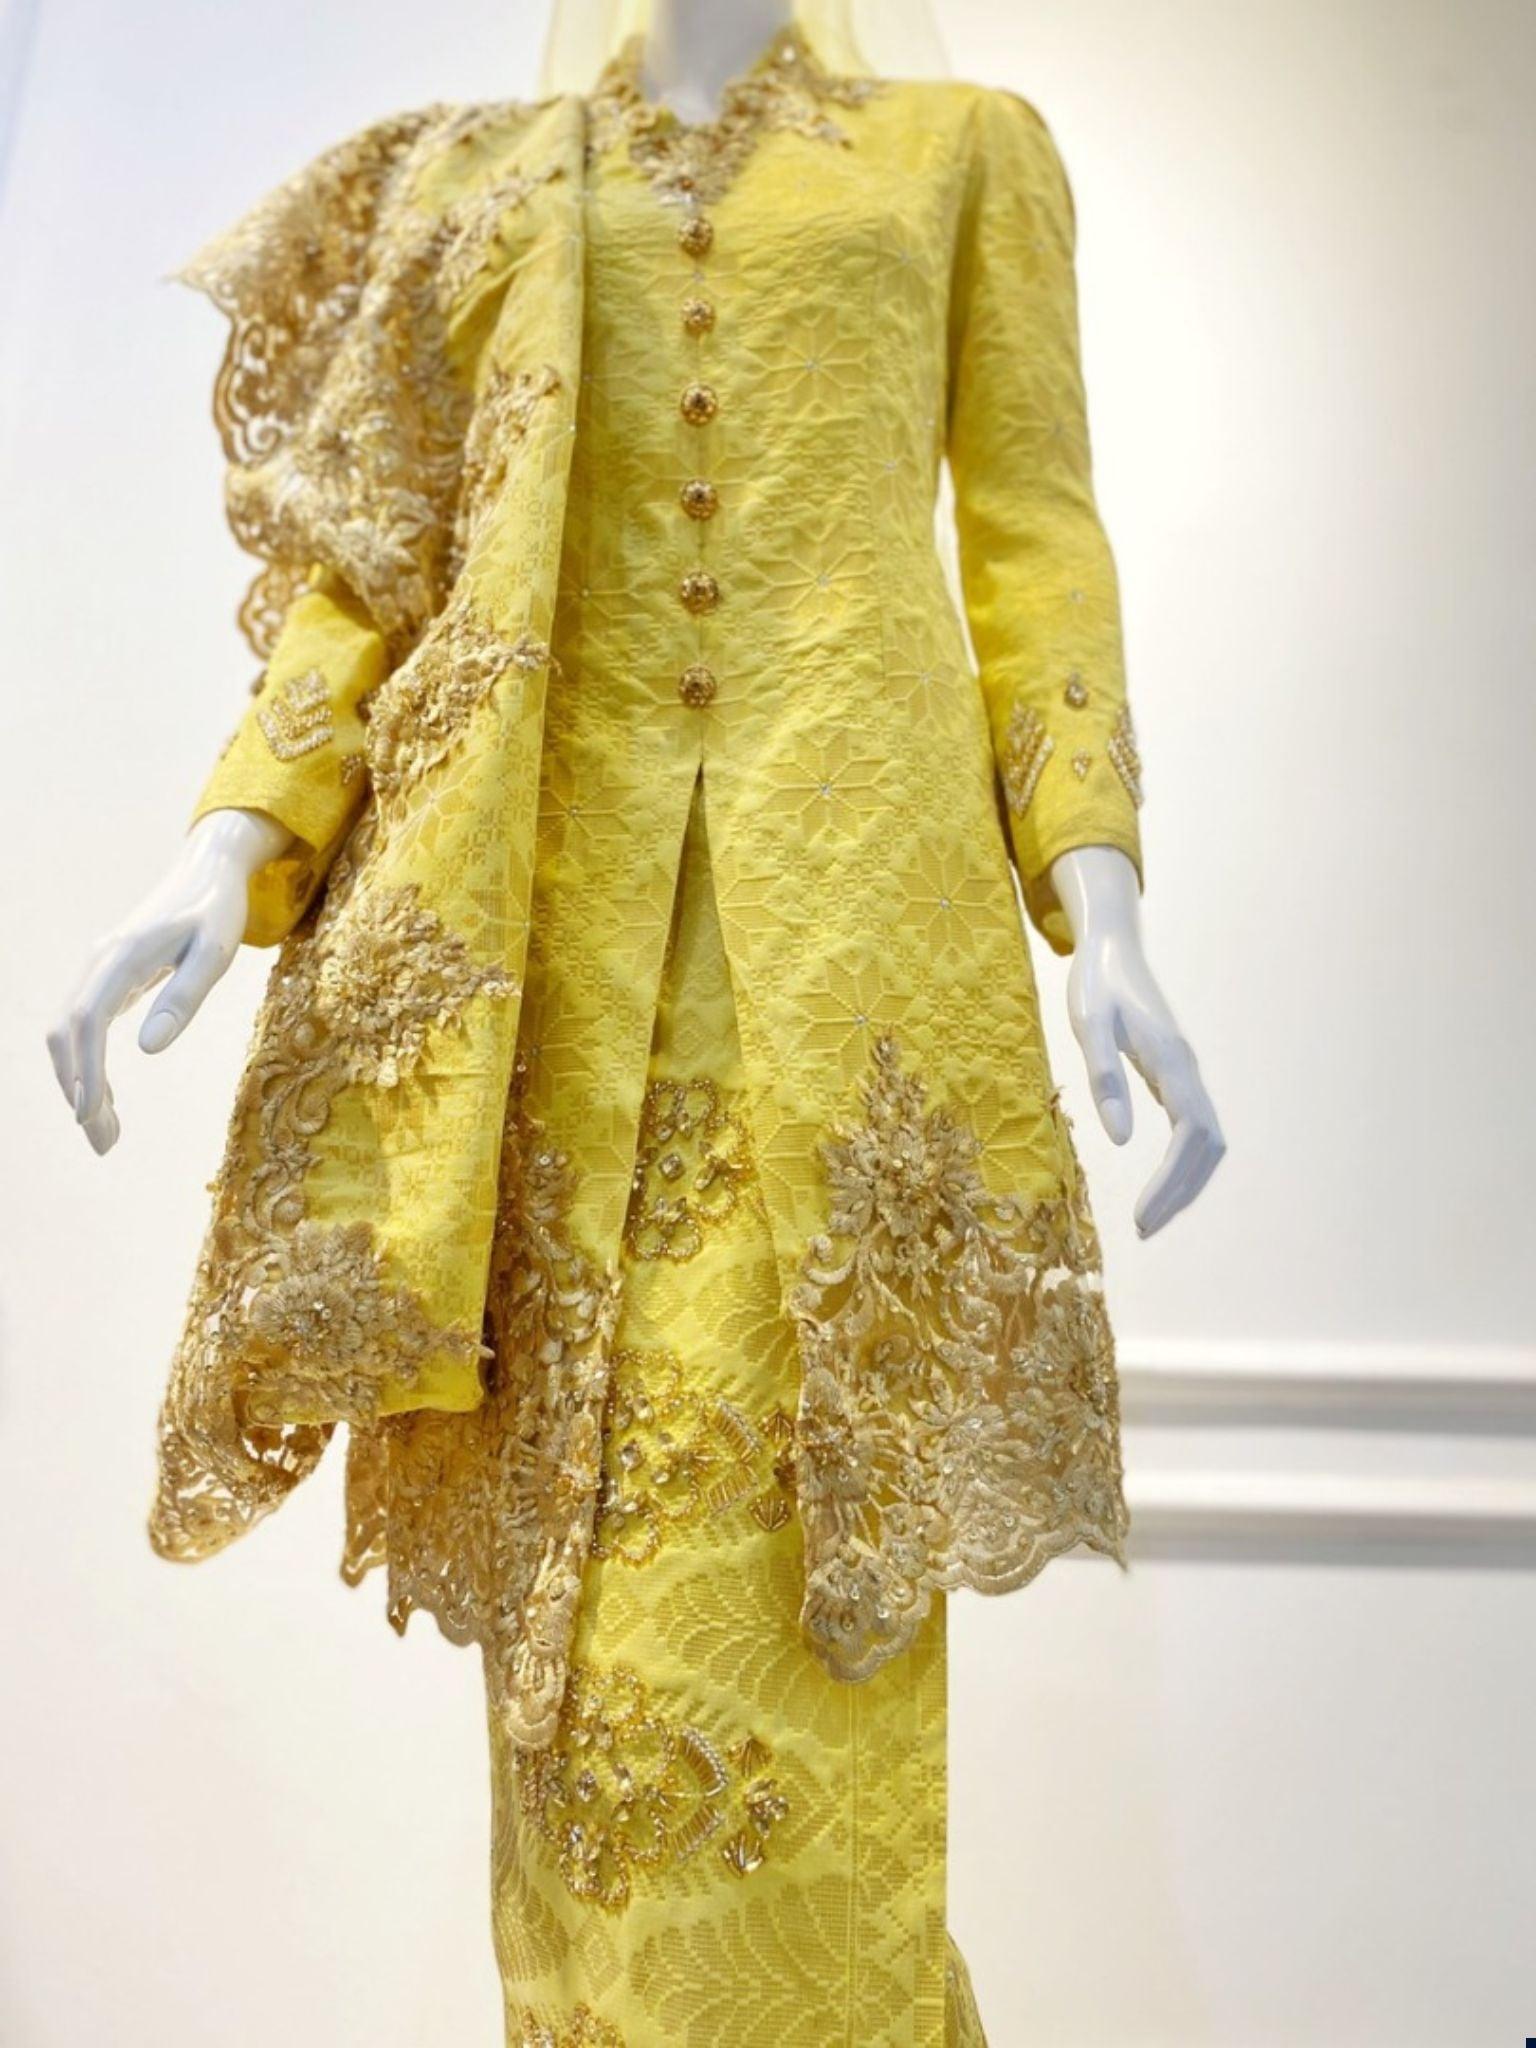 You'll love The PUTERI SAADONG - Baju Sanding Kurung Belah Songket yellow & light gold from PP Signature Bridal. Rent online or book an appointment today!